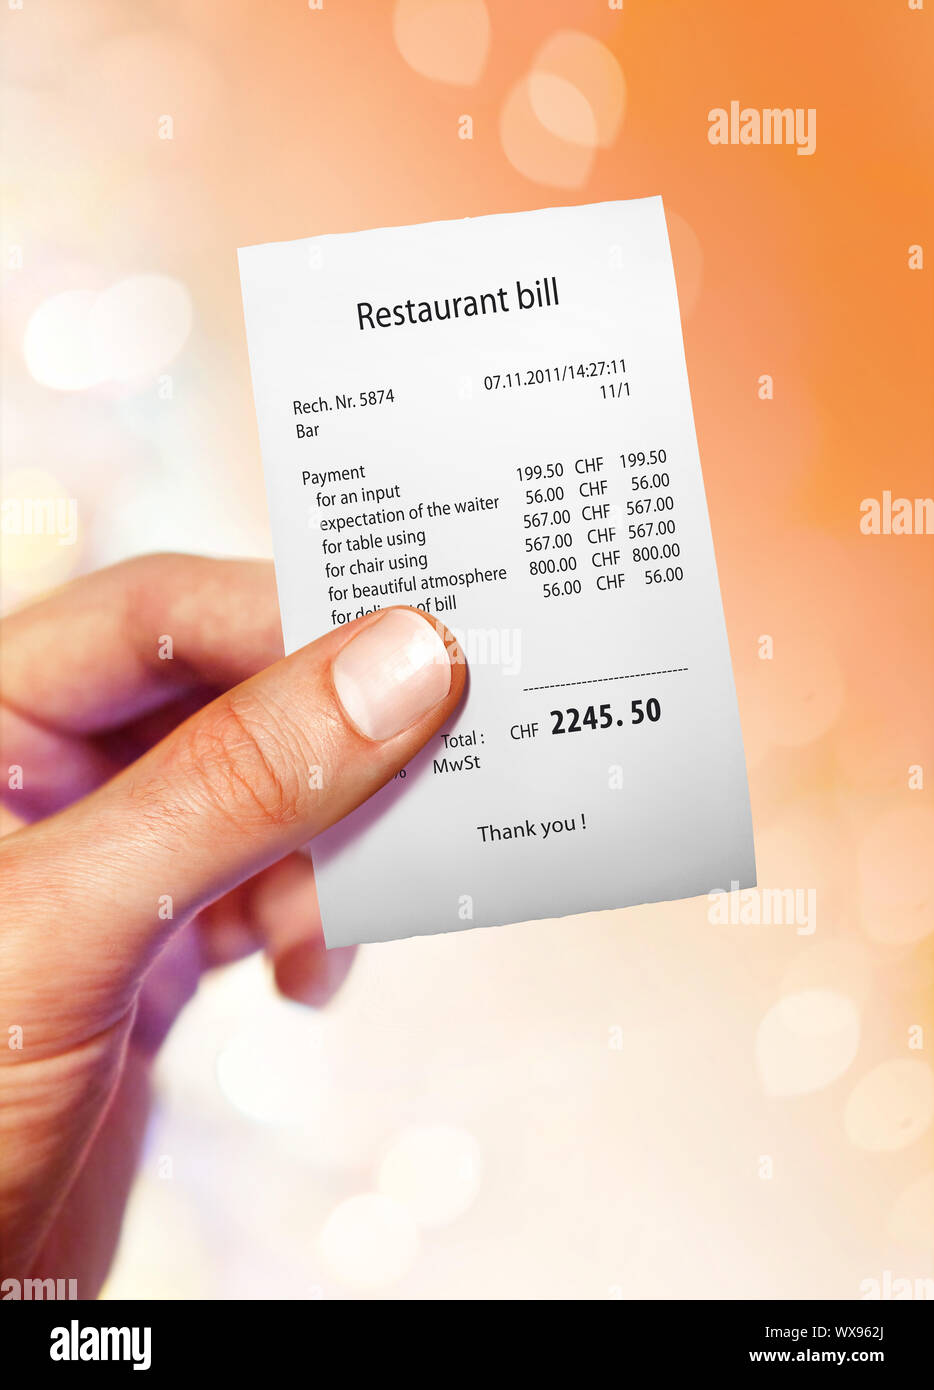 Restaurant bill for a large sum of money on hand Stock Photo